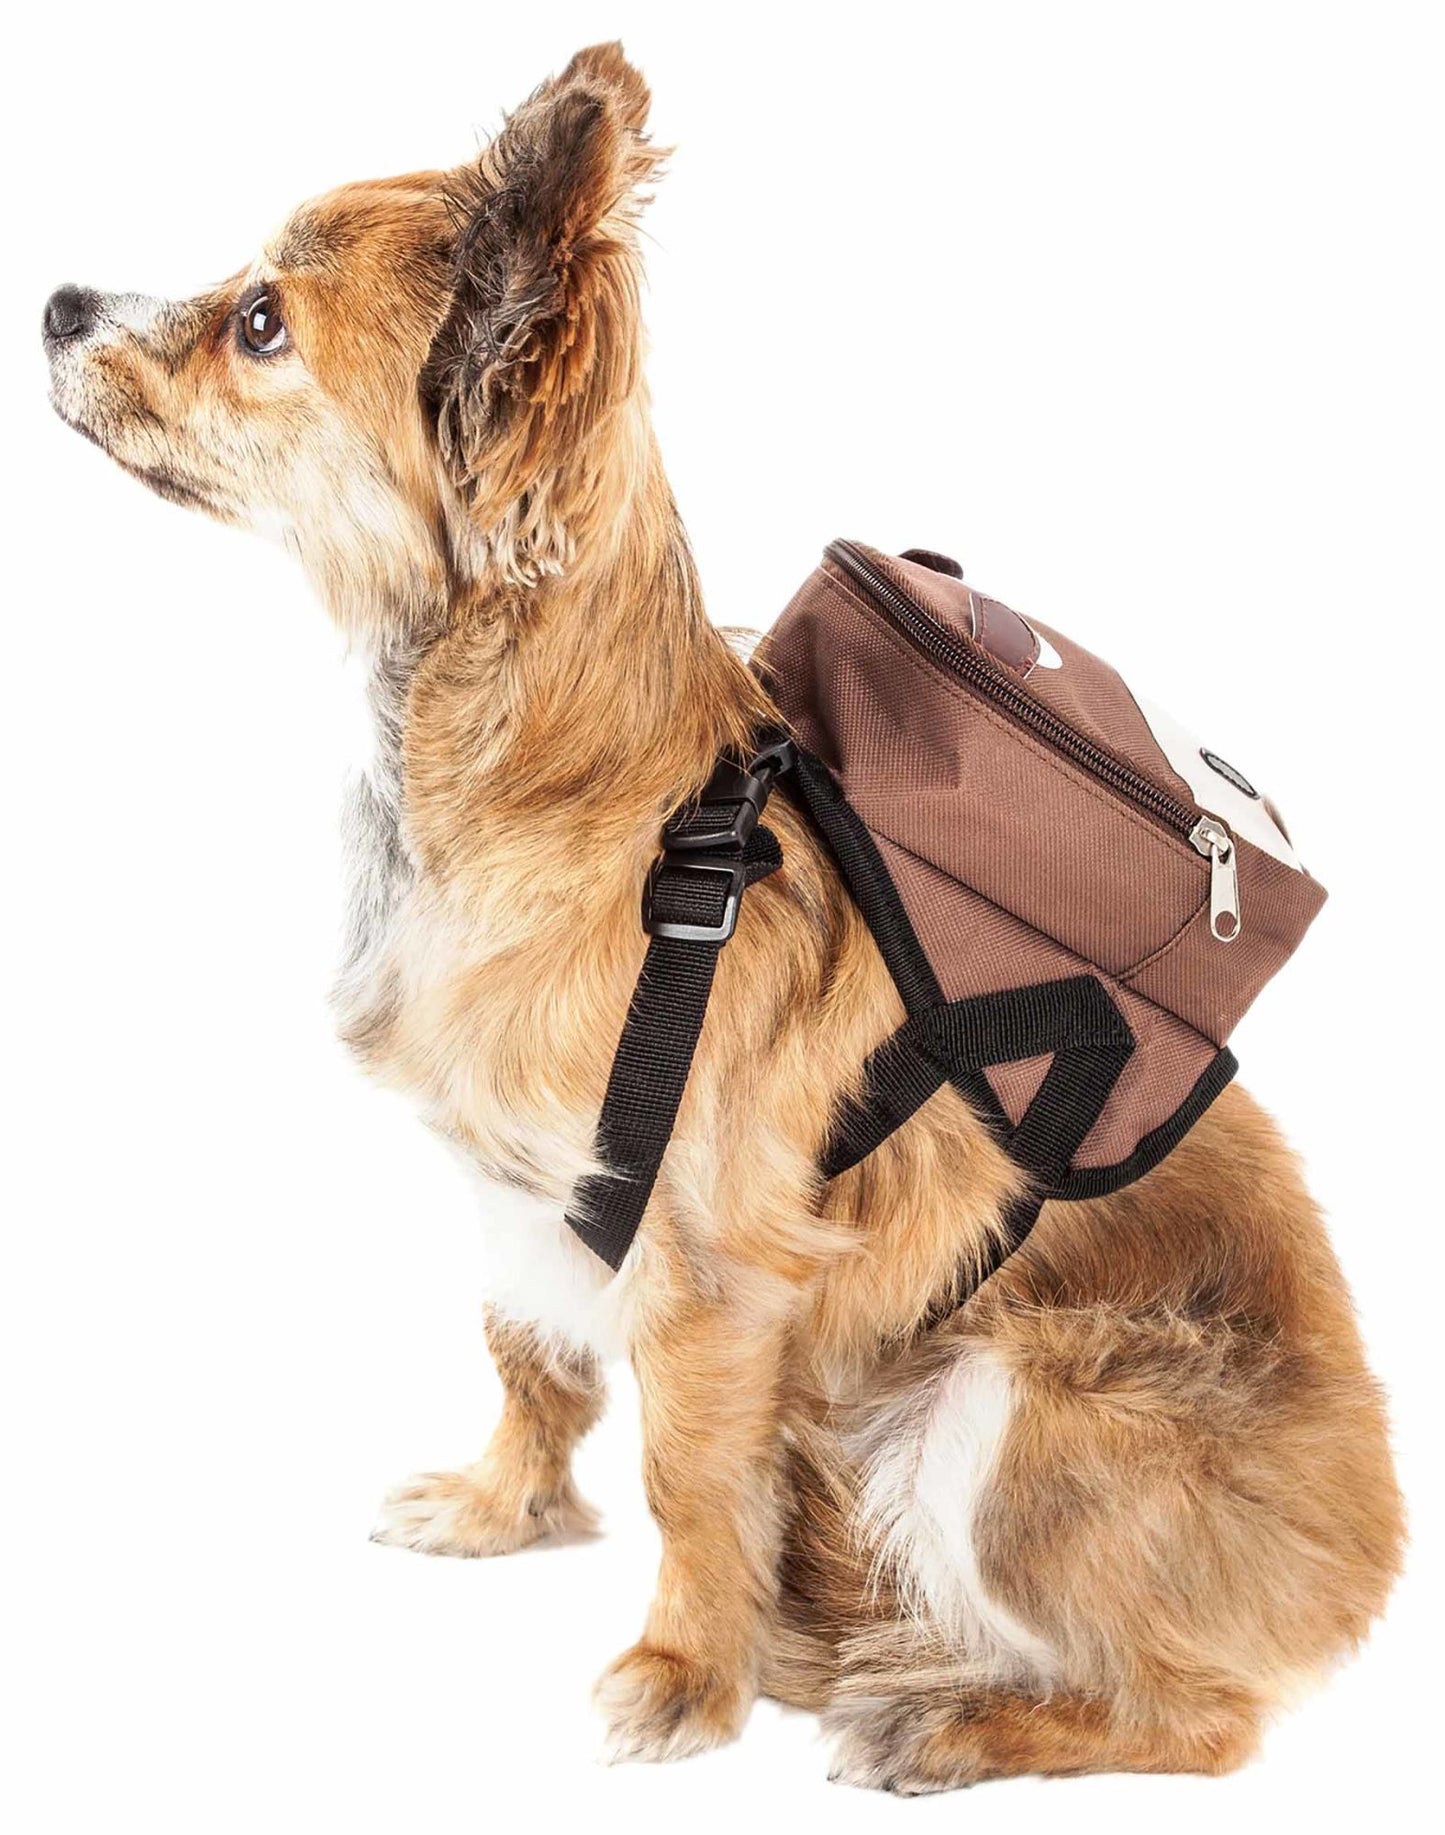 Pet Life 'Mooltese' Large-Pocketed Compartmenta Backpack